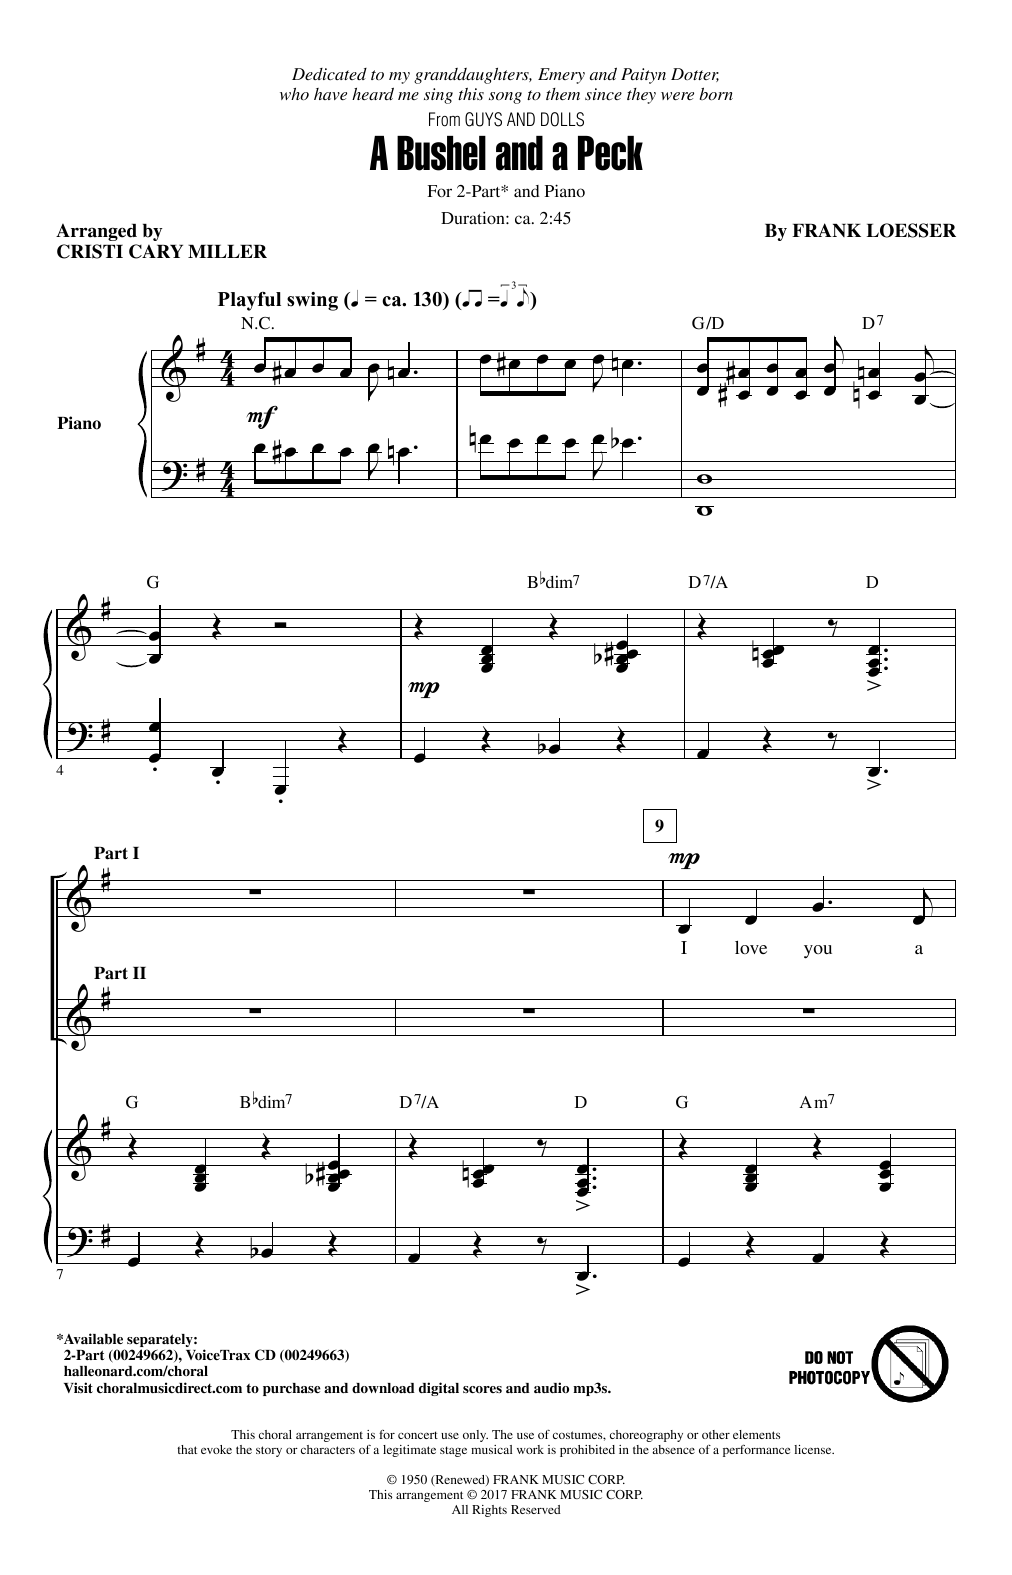 Download Cristi Cary Miller A Bushel And A Peck Sheet Music